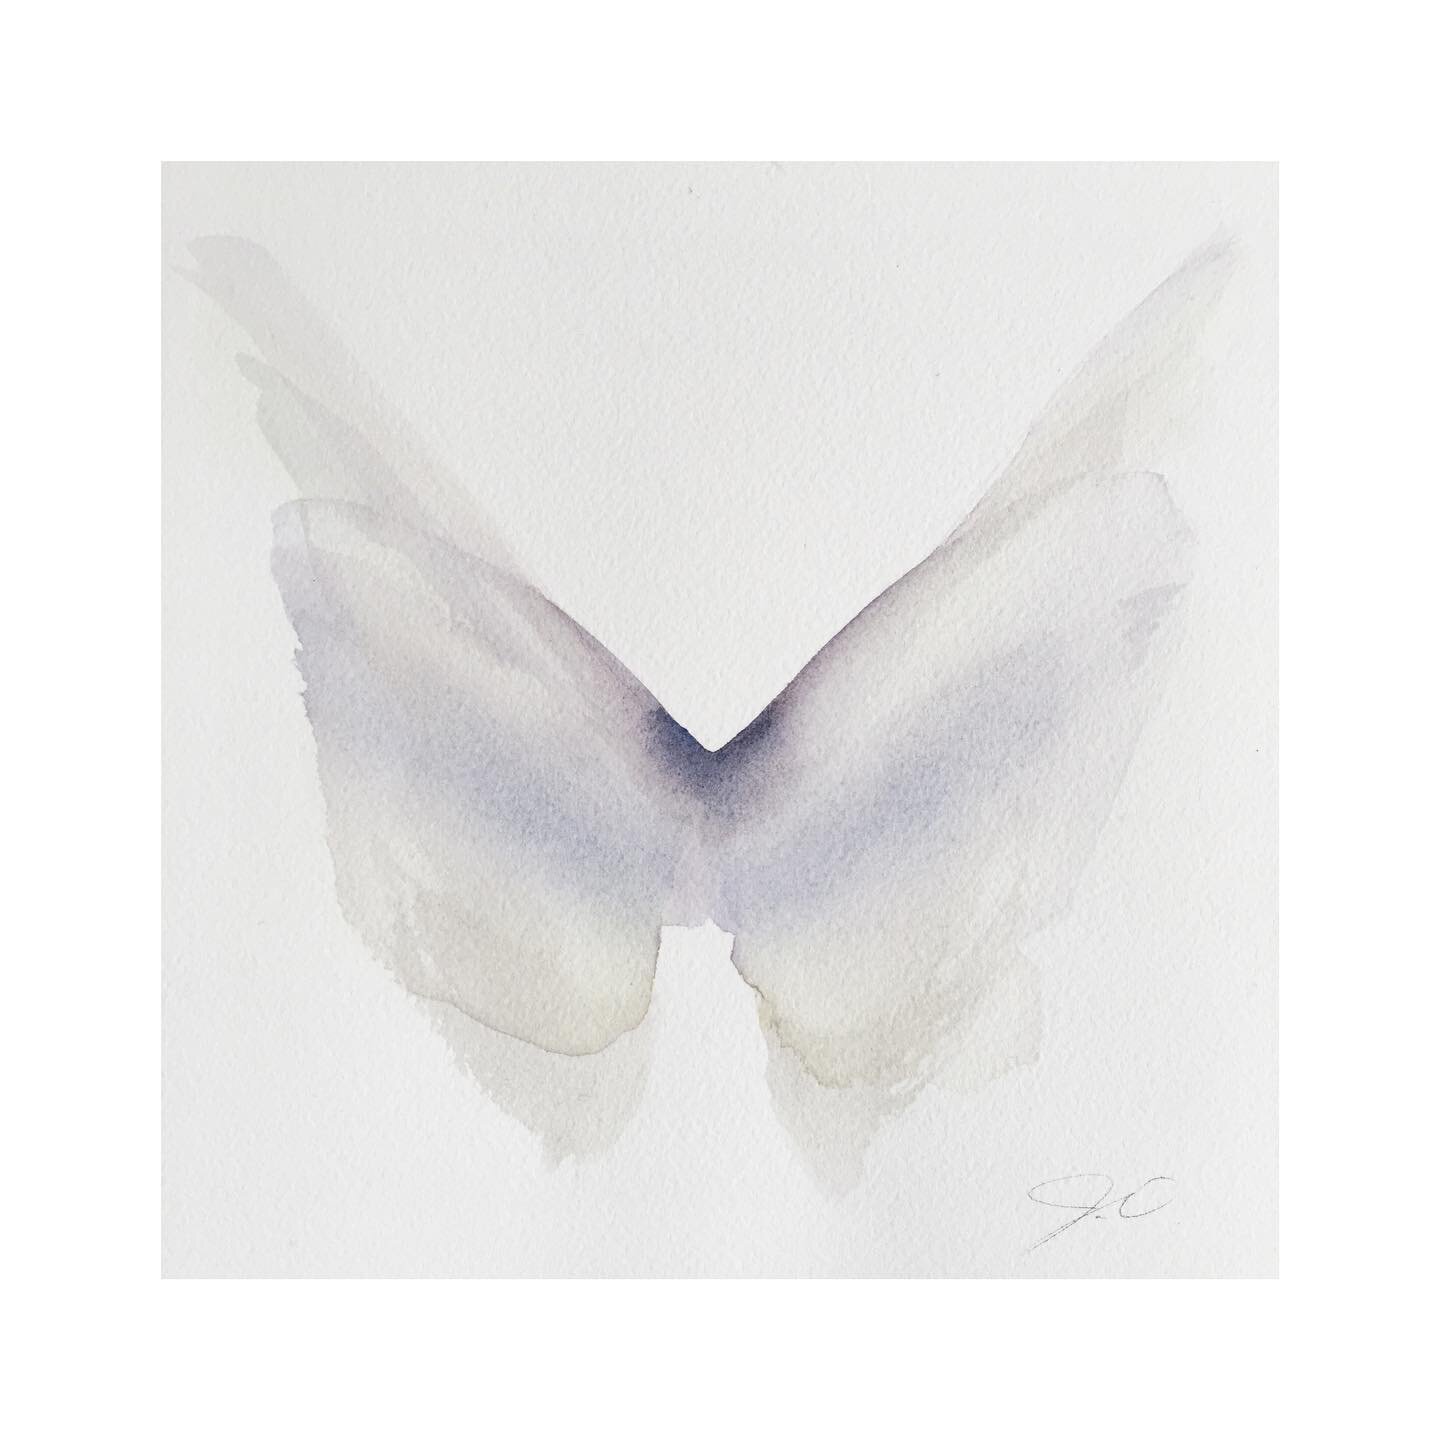 &ldquo;Realizing Wisdom&rdquo; // Watercolor Wings Series, 8x8

Widen the container to receive wisdom within the body. An enriched perspective brings balance with it.
{kyanite + amethyst crystal pigments with sacred water from St. Baume, France}

My 